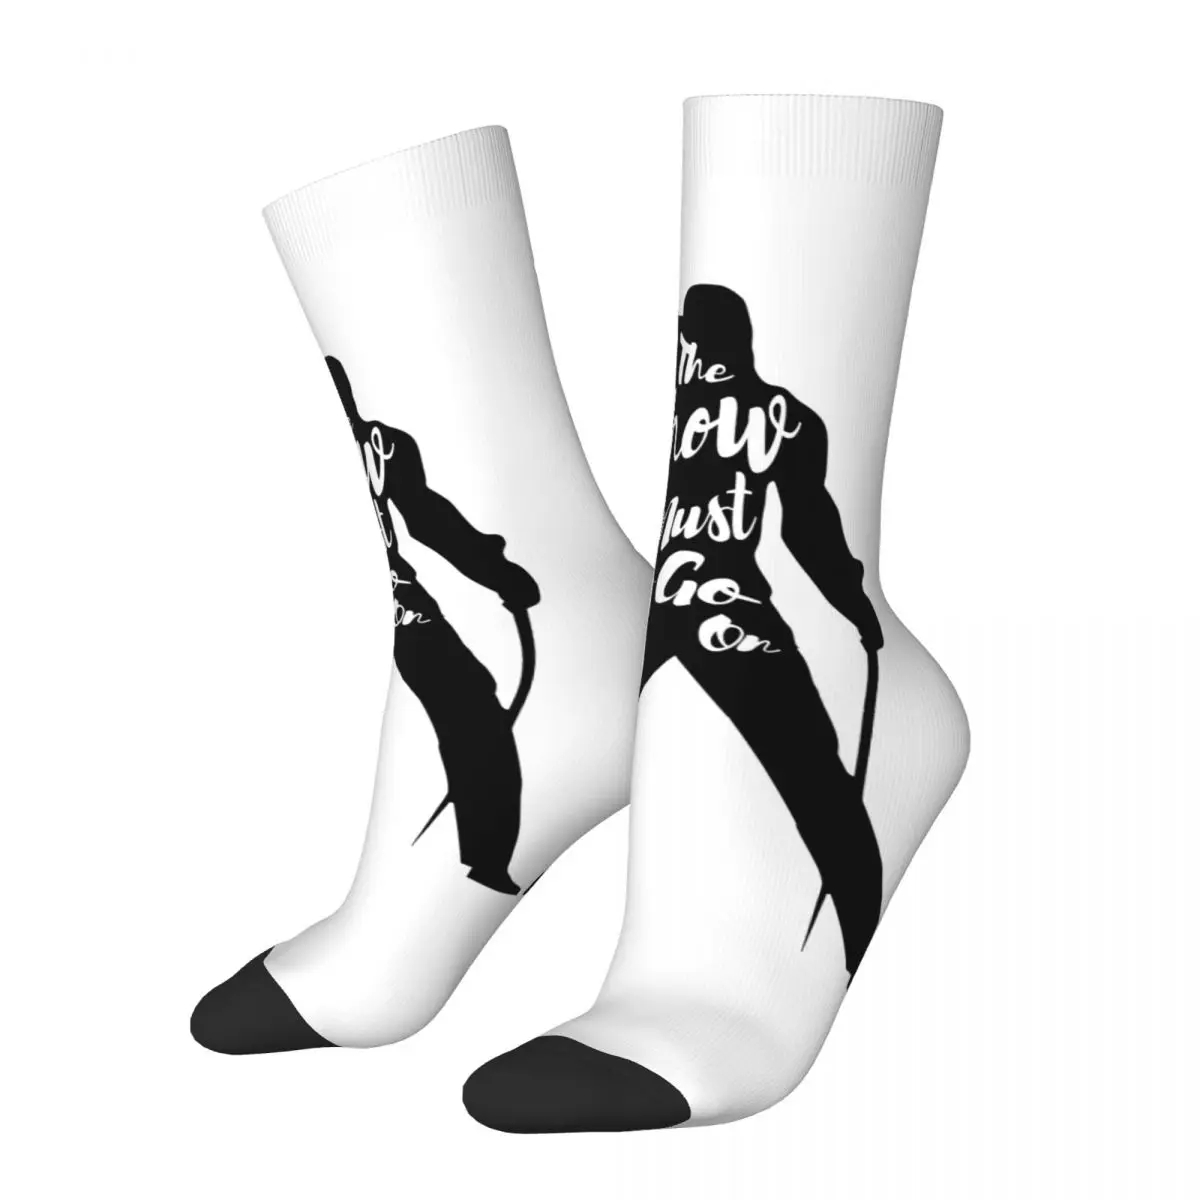 

R250 Stocking Freddie Mercury The Show Must Go On Art Pr The Best Buy Funny Novelty Casual Graphic Elastic Socks